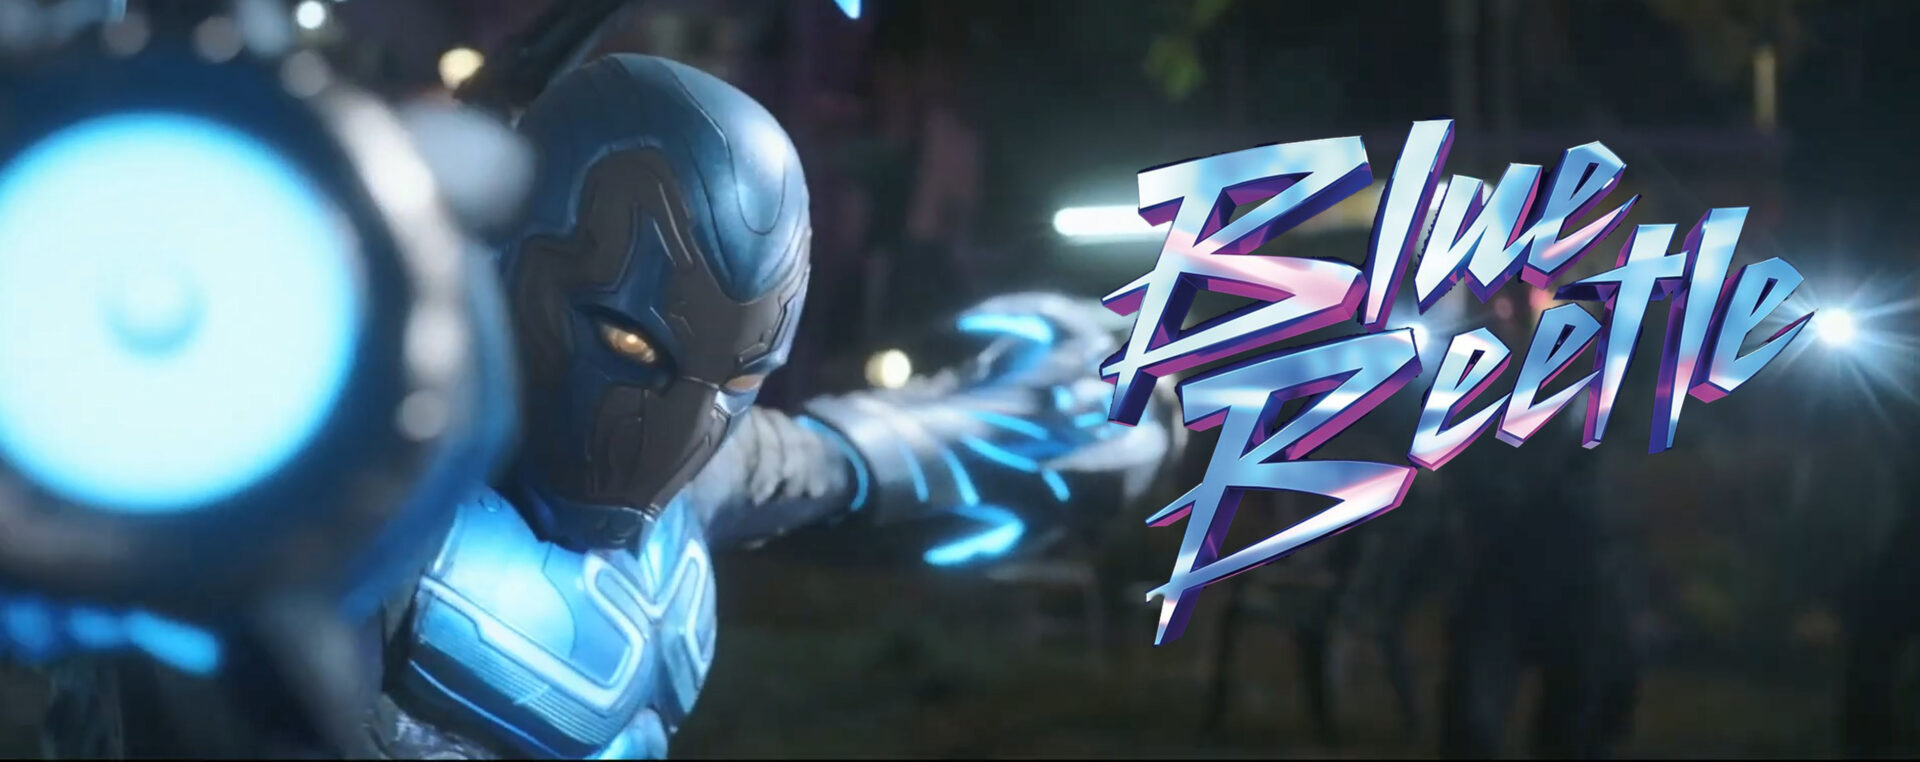 blue beetle theatrical trailer 1 banner